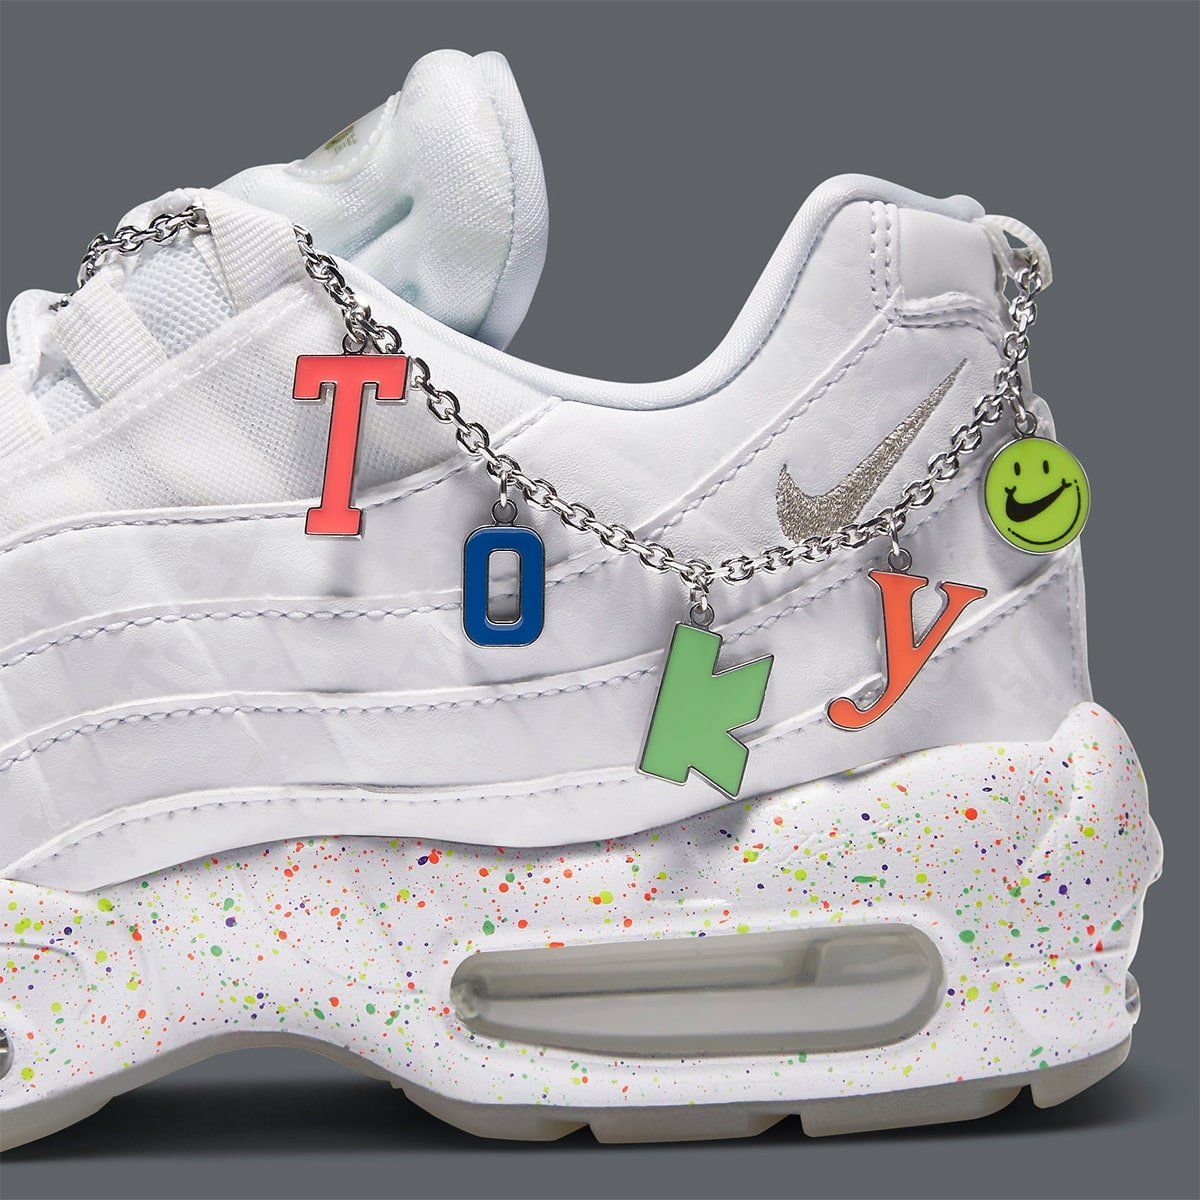 The Nike Air Max 95 “Tokyo” is Certainly a Charmer | HOUSE OF HEAT